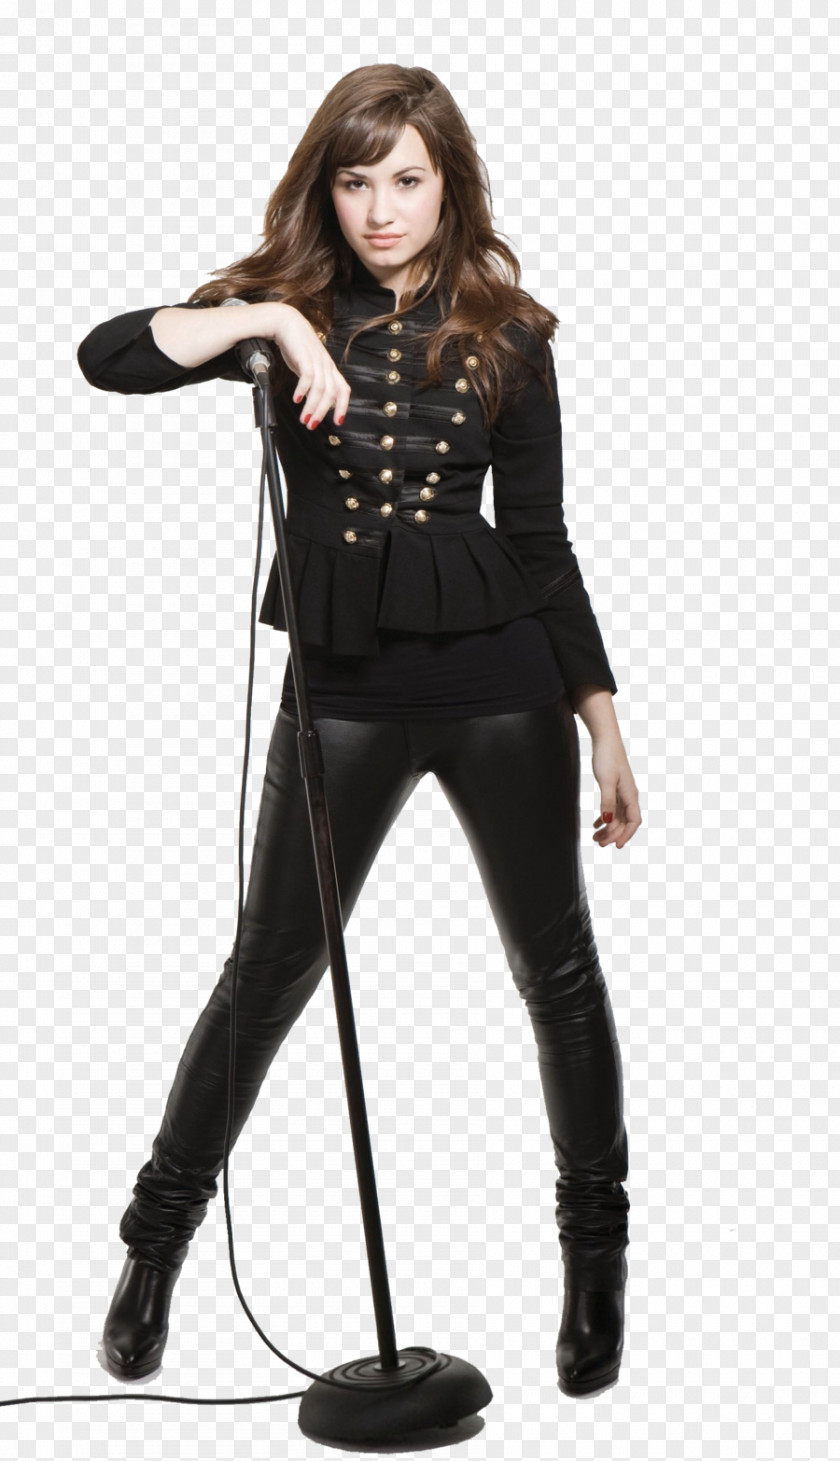 Demi Lovato Don't Forget Album Here We Go Again Photo Shoot PNG